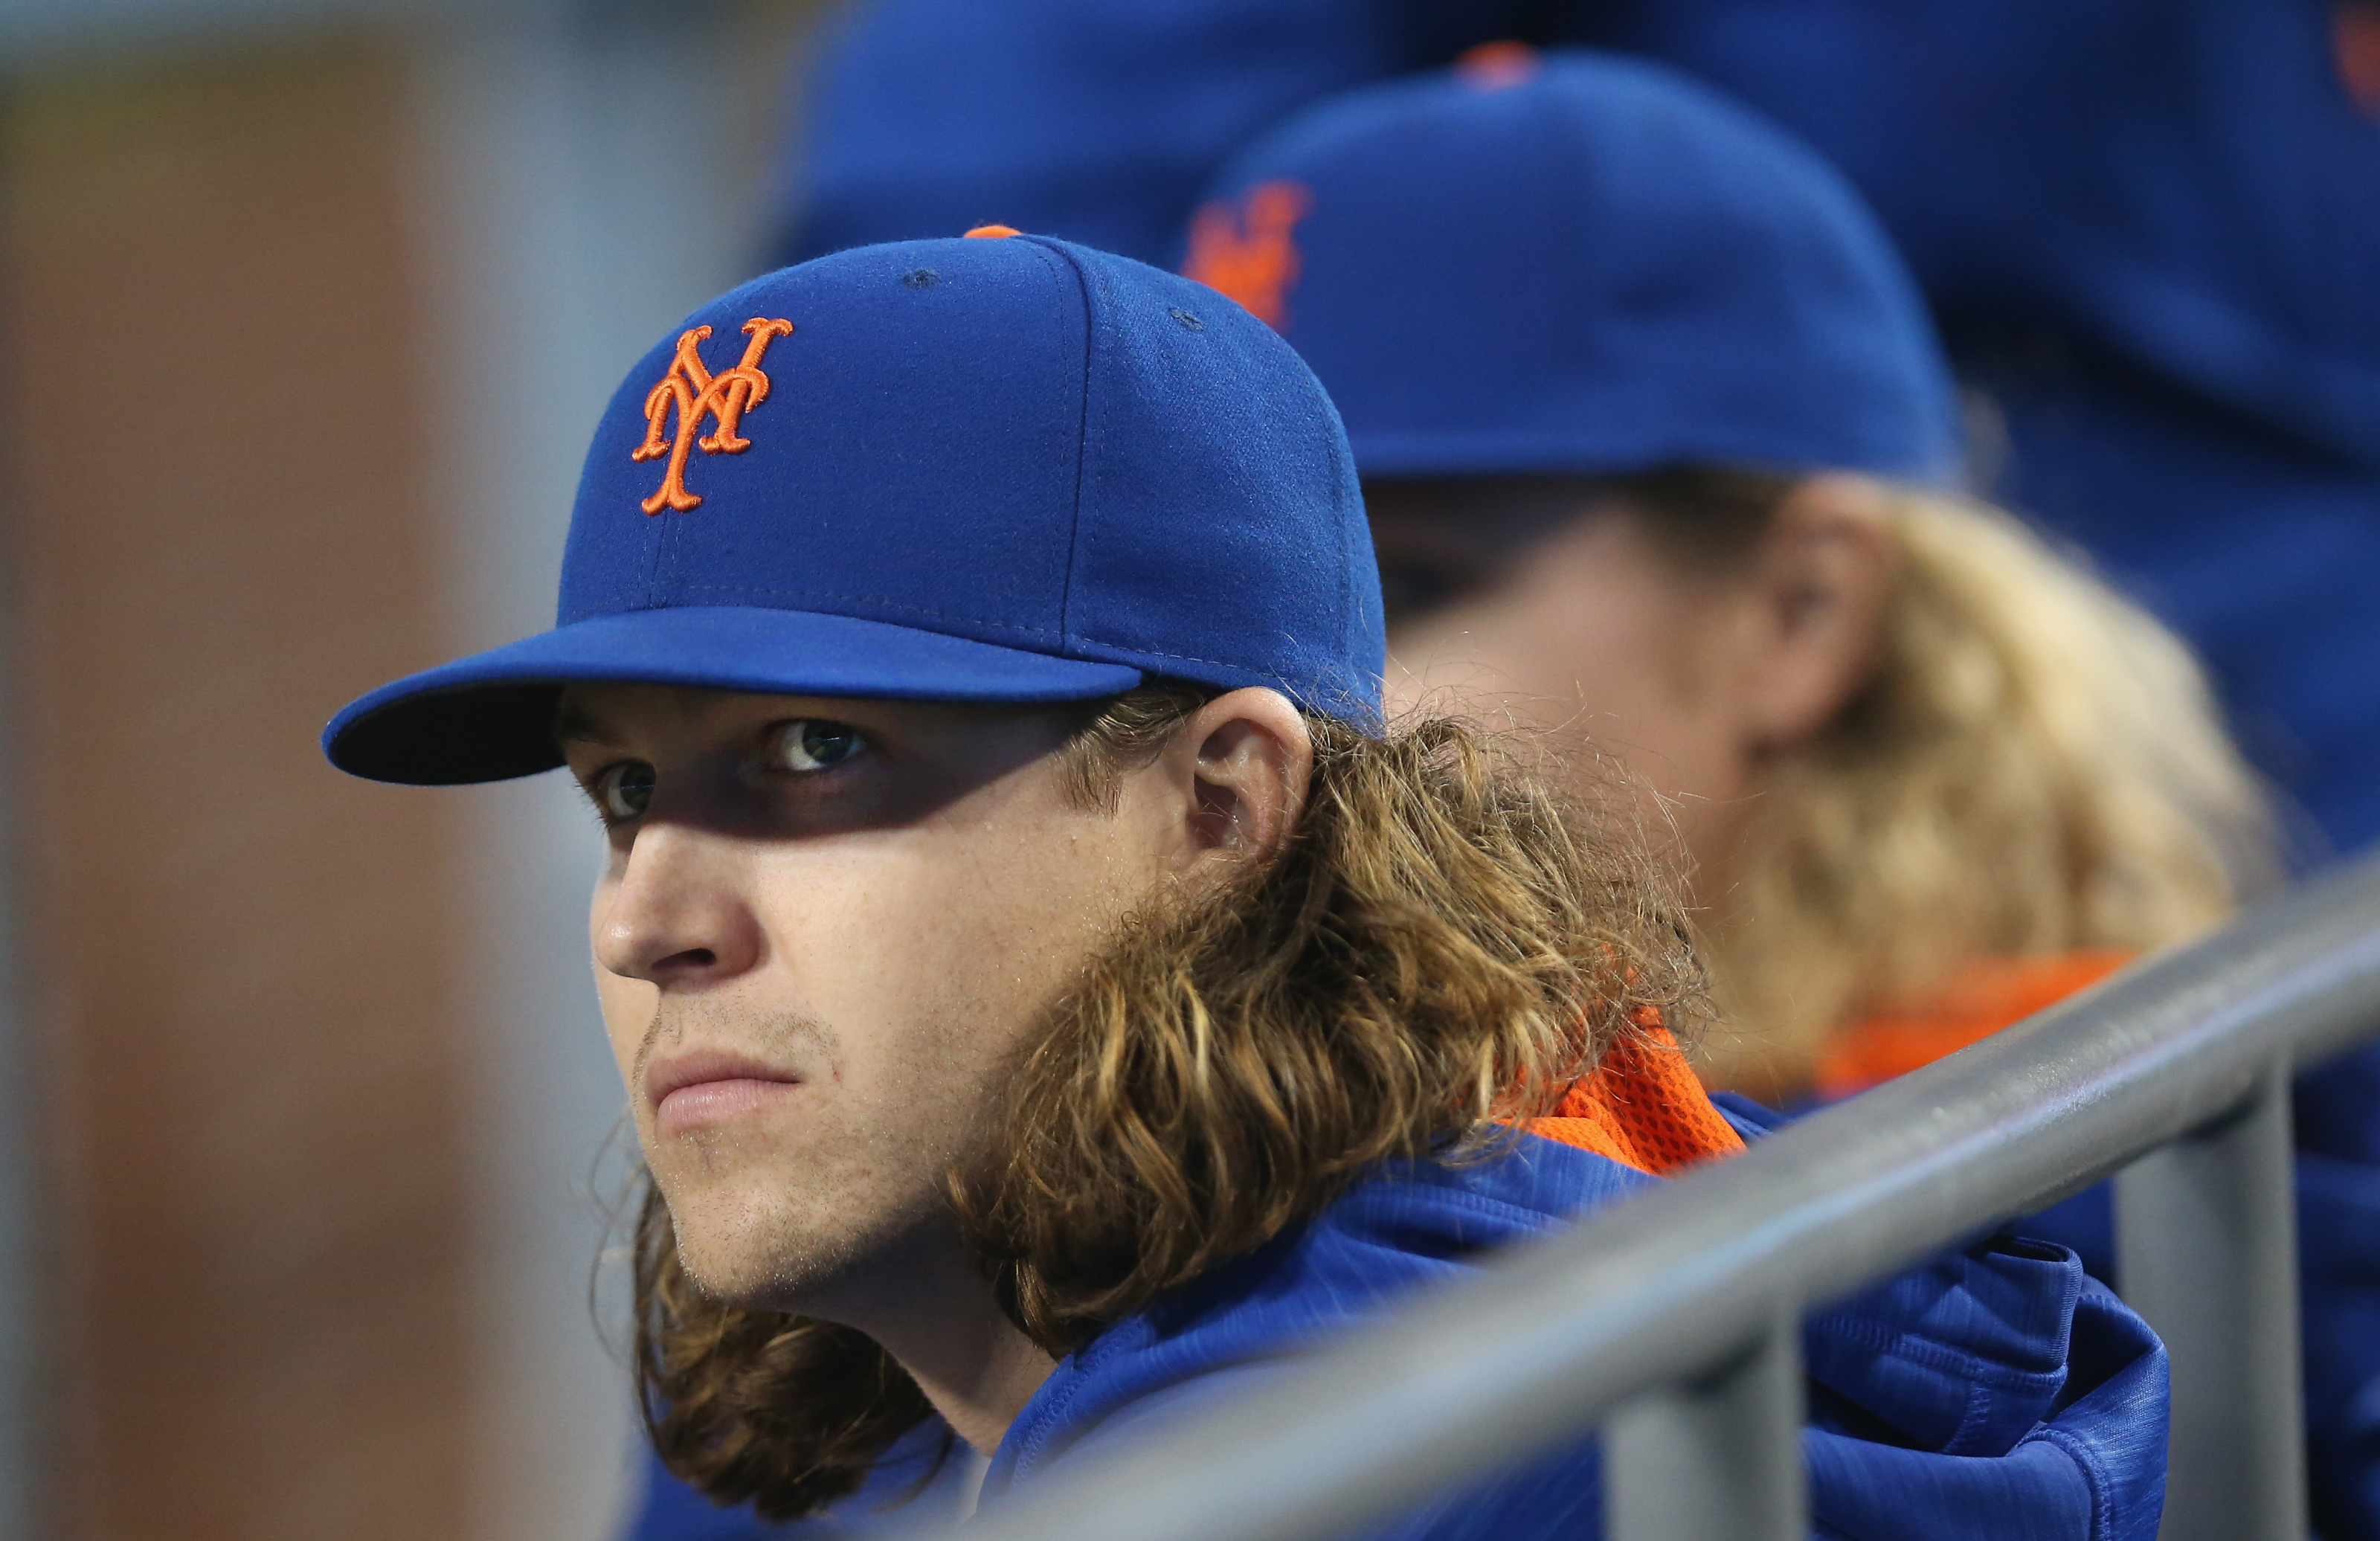 Jacob deGrom and Noah Syndergaard Talk Hair and the World Series